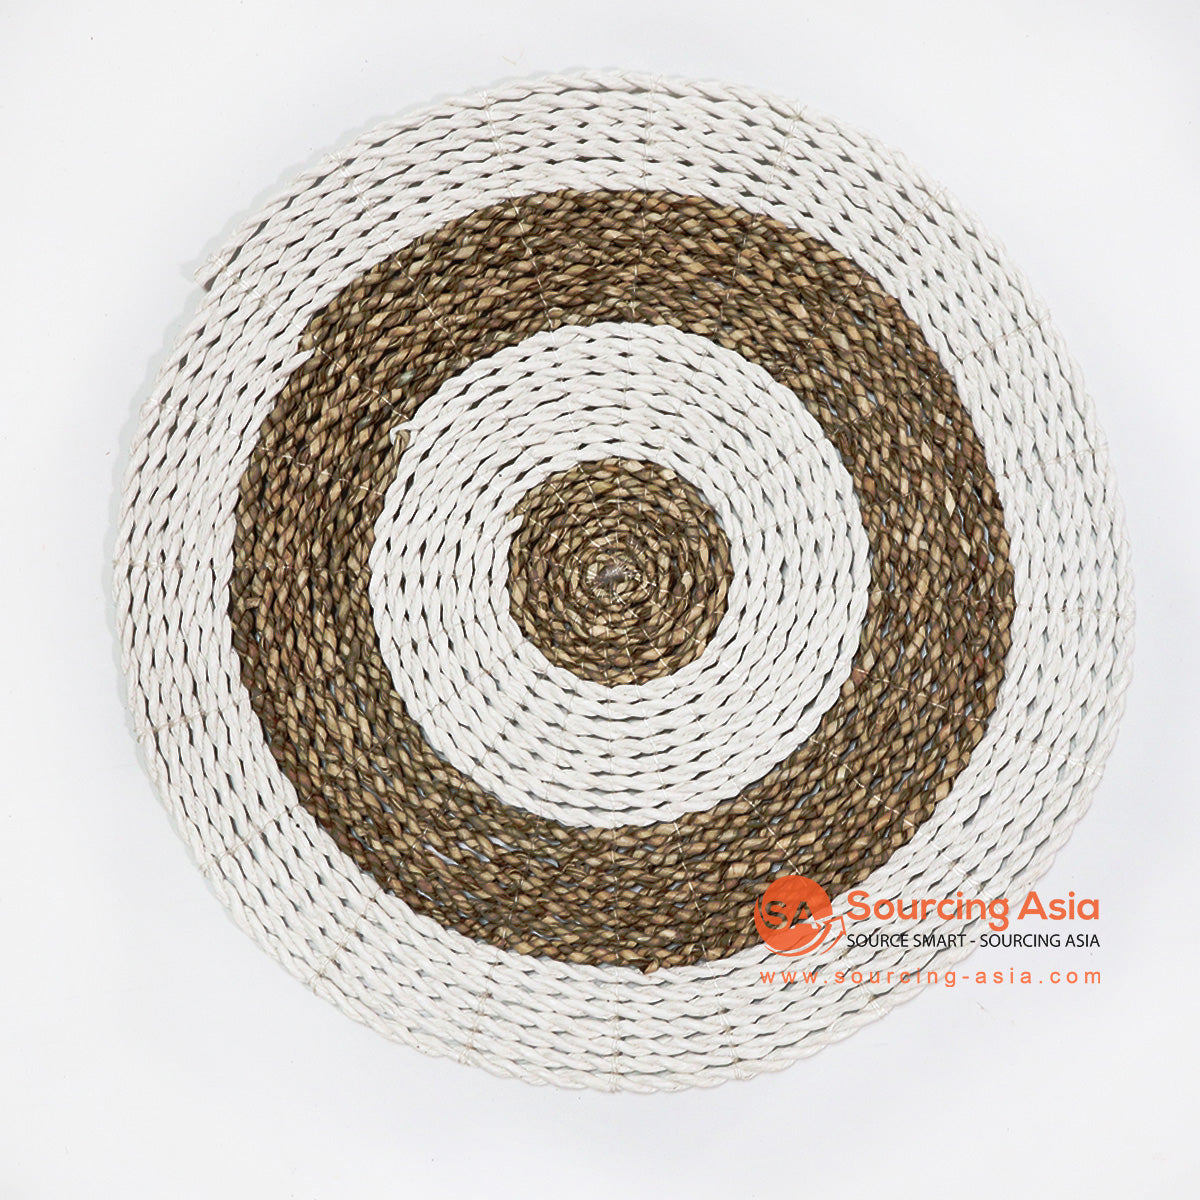 HBSC020 NATURAL WOVEN SEA GRASS AND WHITE PLASTIC ROUND DECORATIVE PLACEMAT